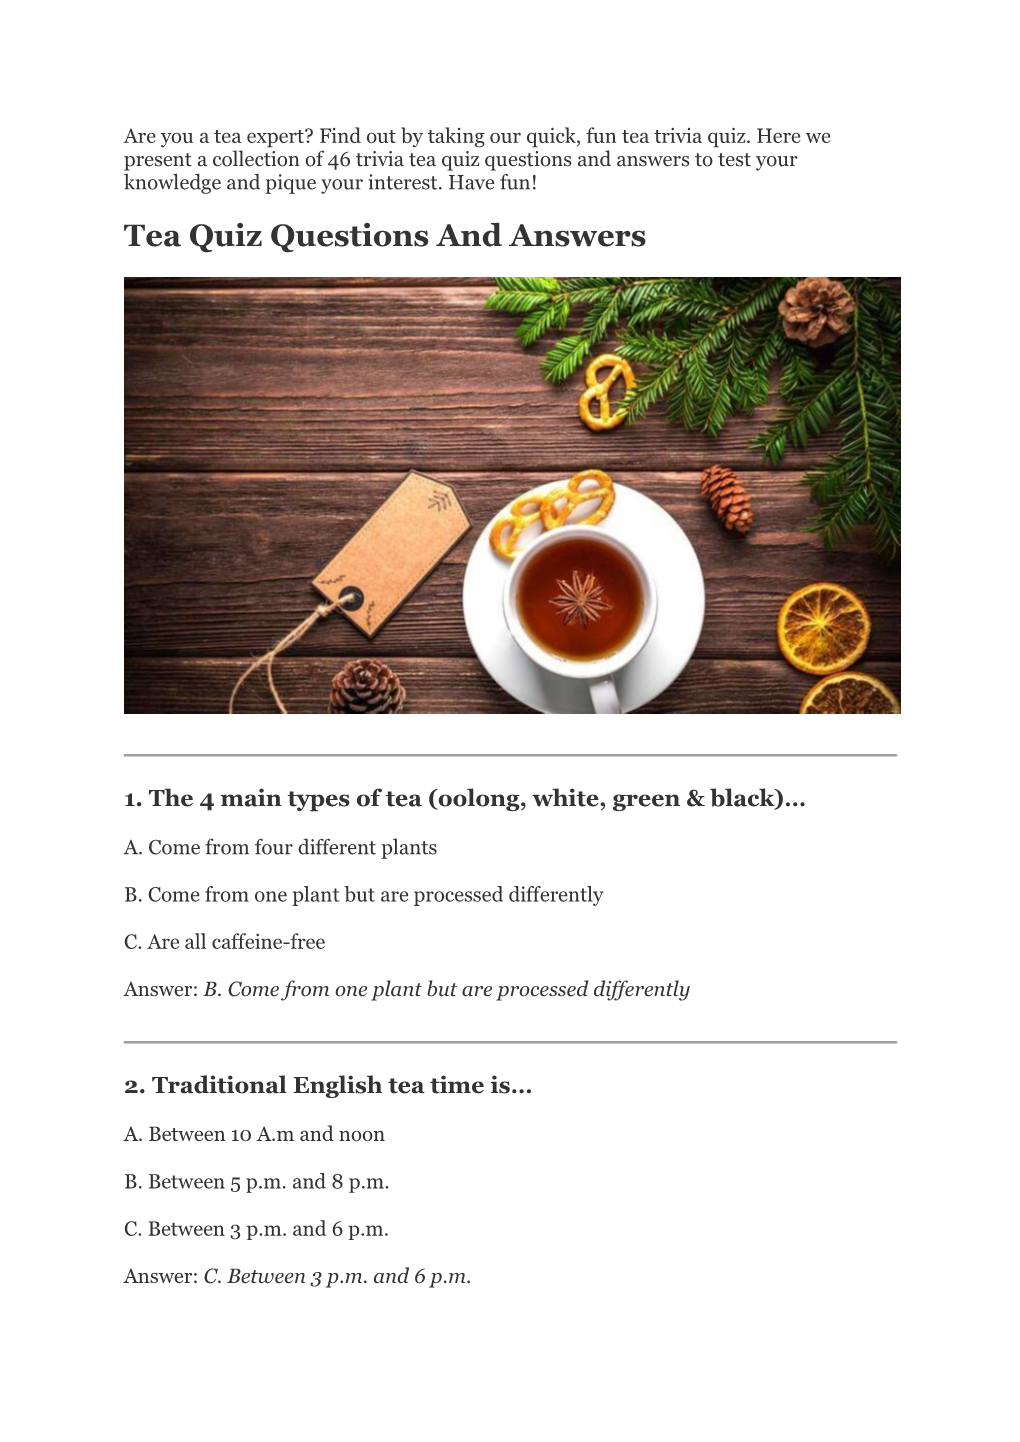 Tea Quiz Questions and Answers to Test Your Knowledge and Pique Your Interest